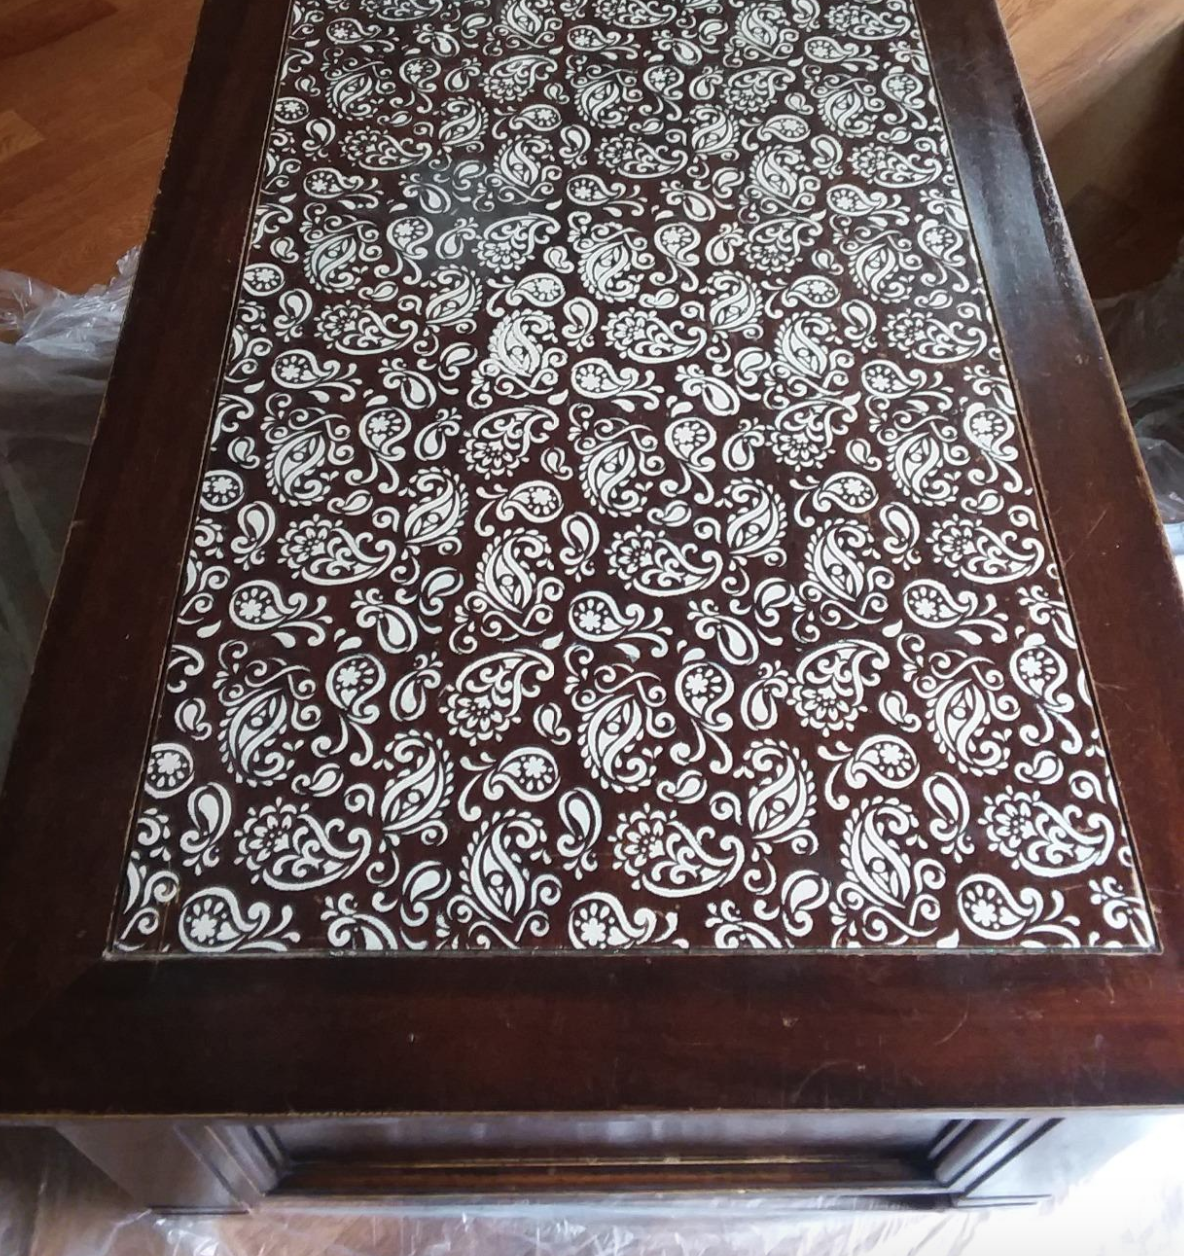 A wood coffee table with the stenciled white paisley pattern on top